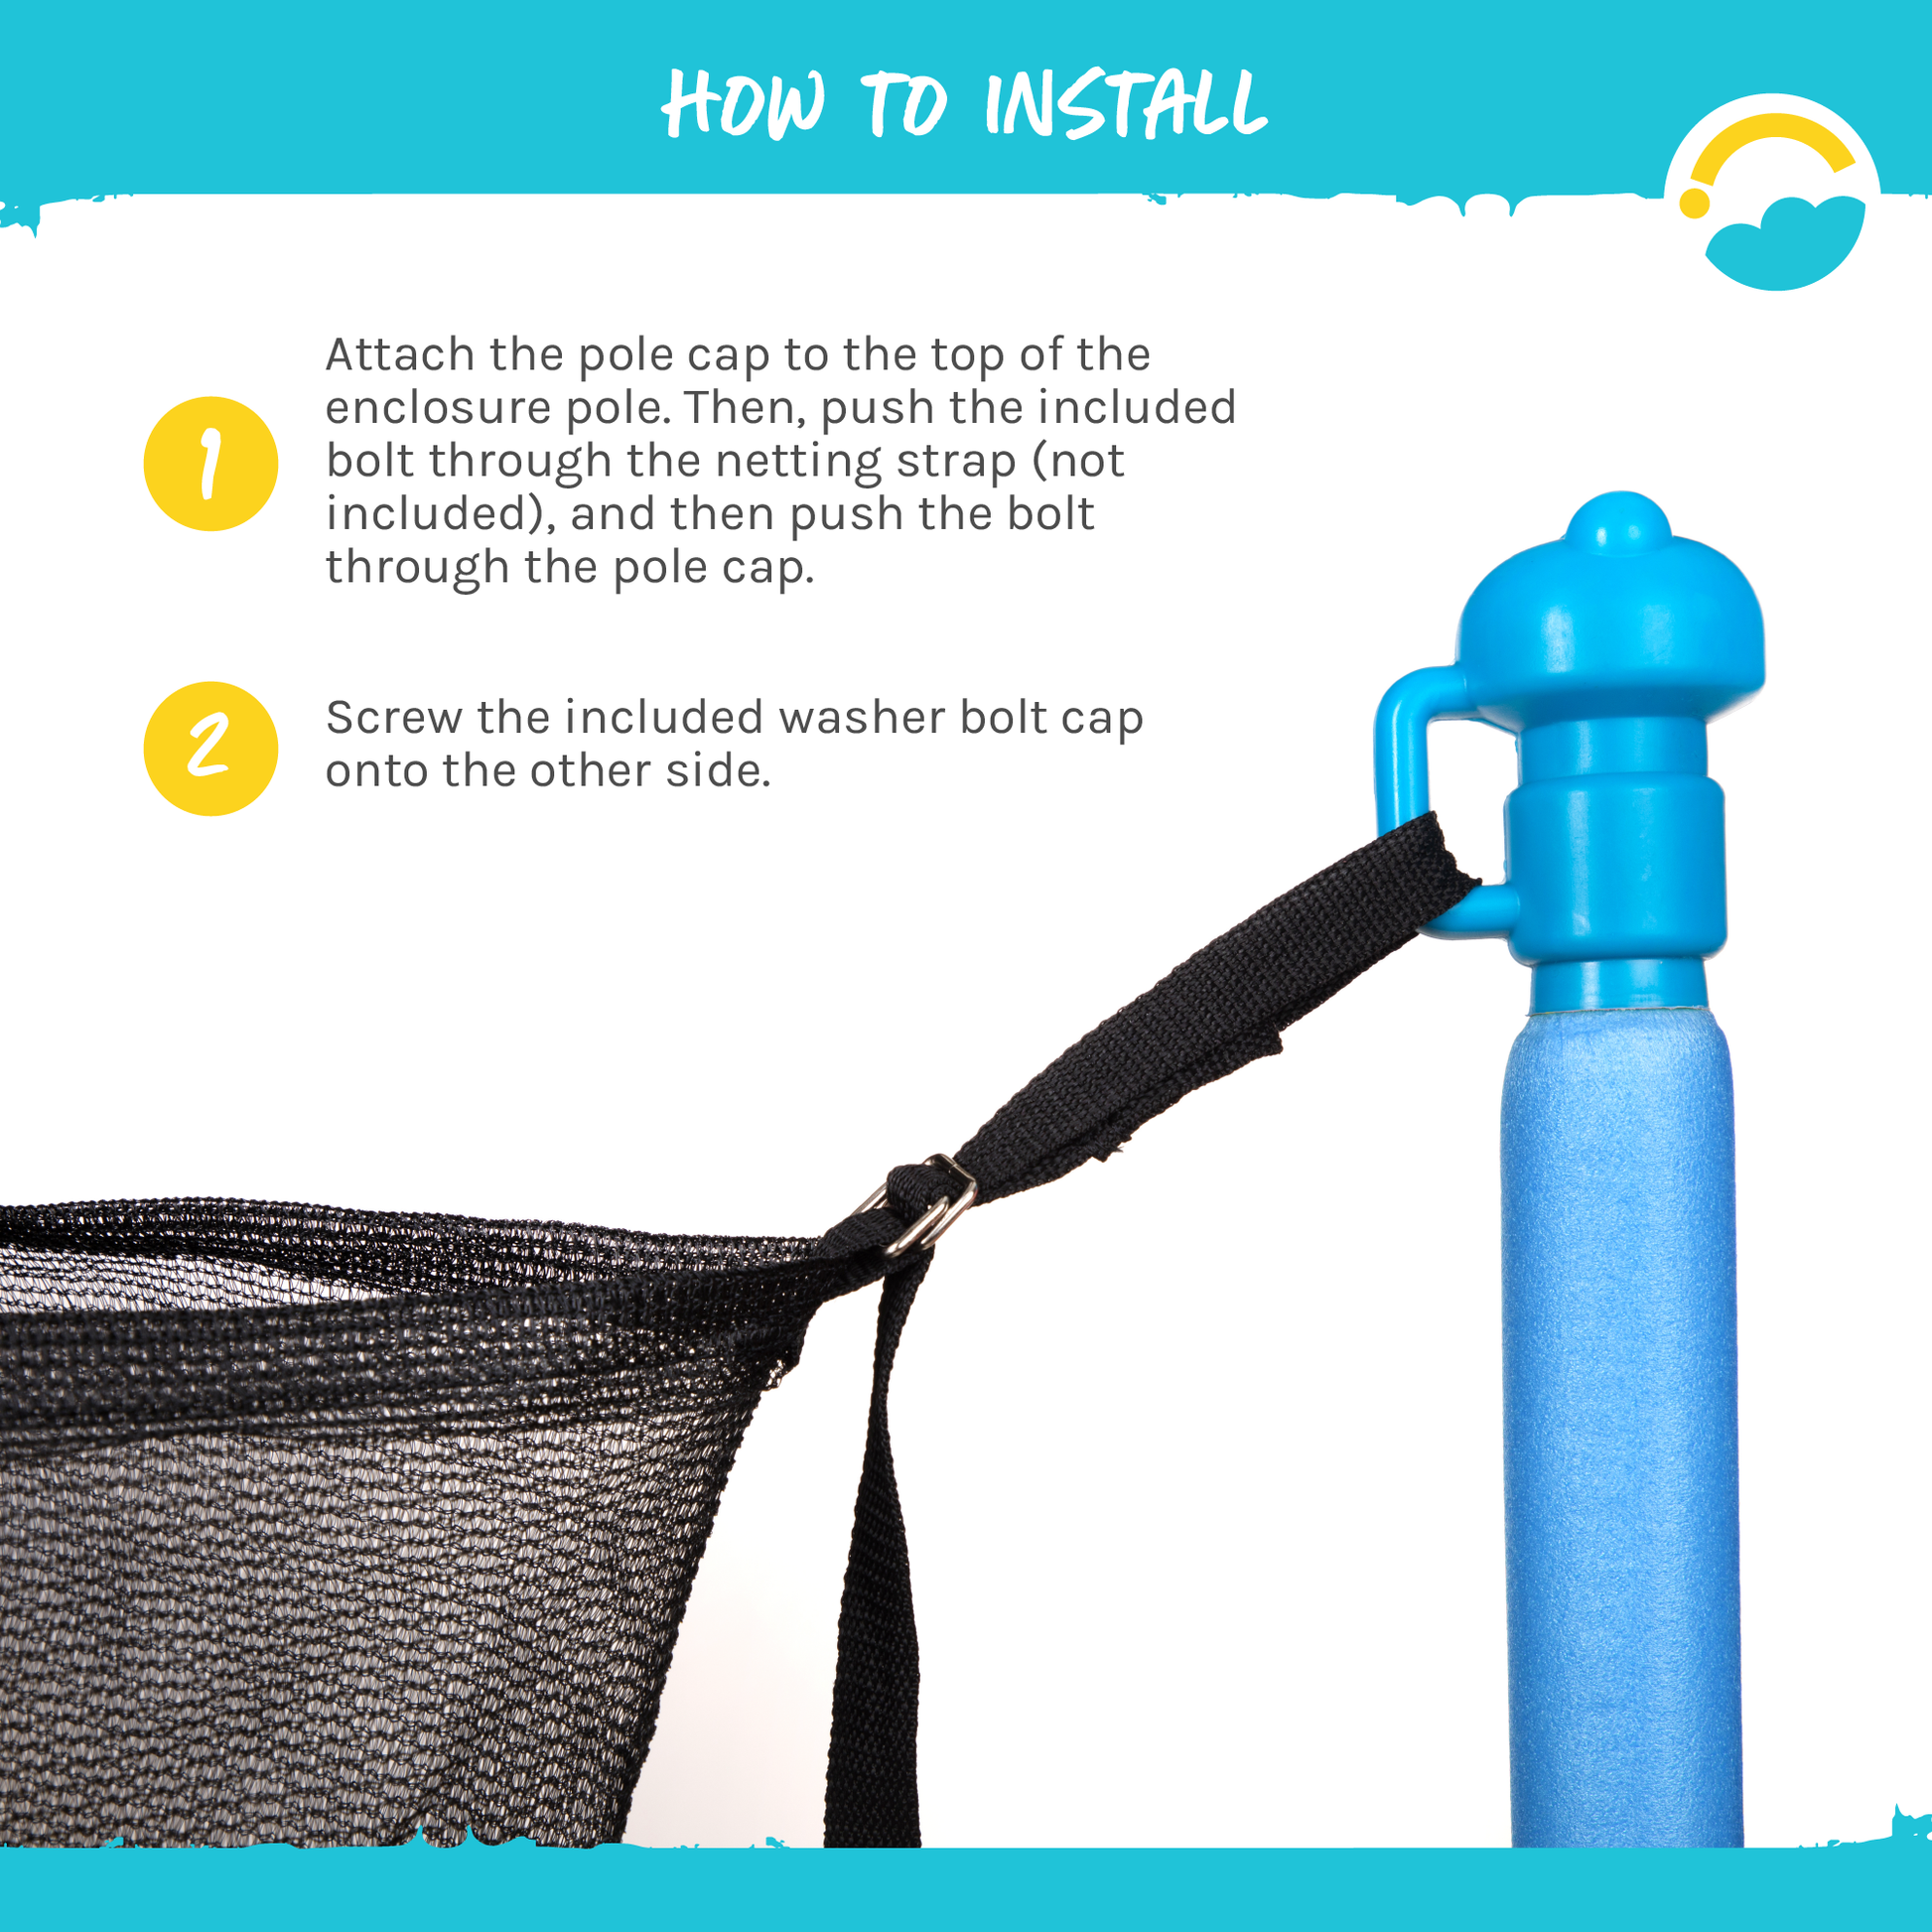 How to Install: 1-Attach the pole cap to the top of the enclosure pole. Then, push the included bolt through the netting strap (not included), and then push the bolt through the pole cap. 2-Screw the included washer bolt cap onto the other side.